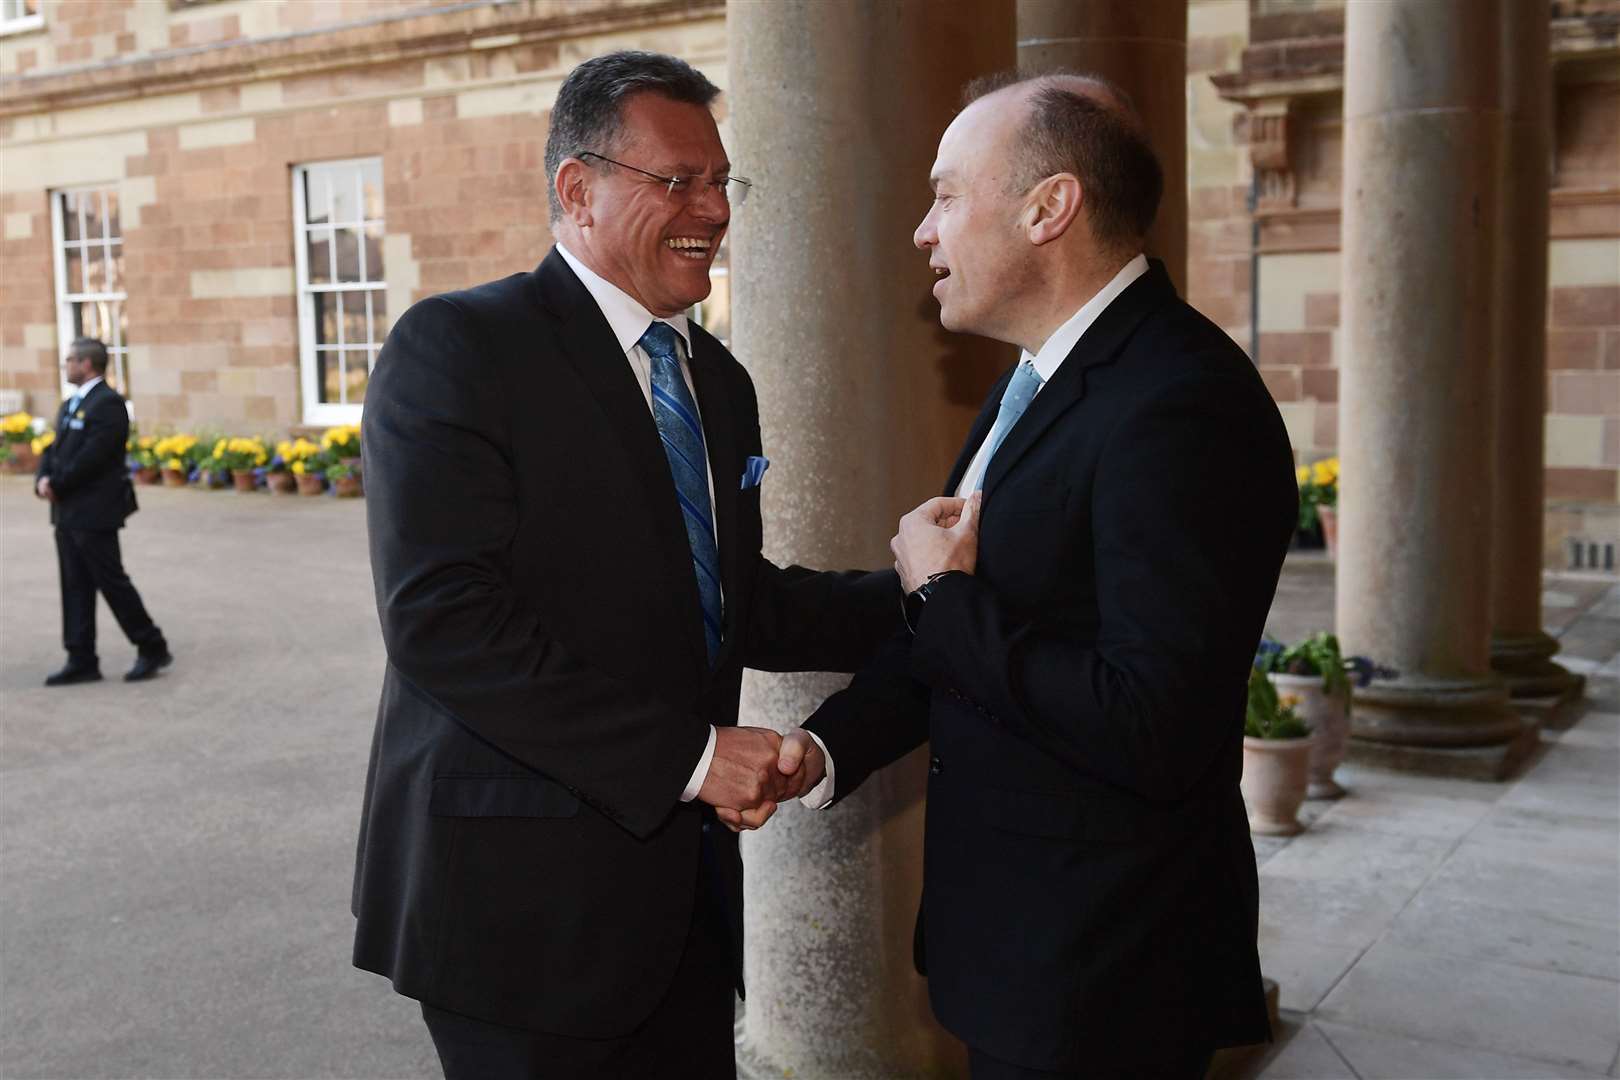 Maros Sefcovic, left, meets Northern Ireland Secretary Chris Heaton-Harris as they arrive for a dinner marking the 25th anniversary of the Good Friday Agreement (Charles McQuillan/PA)